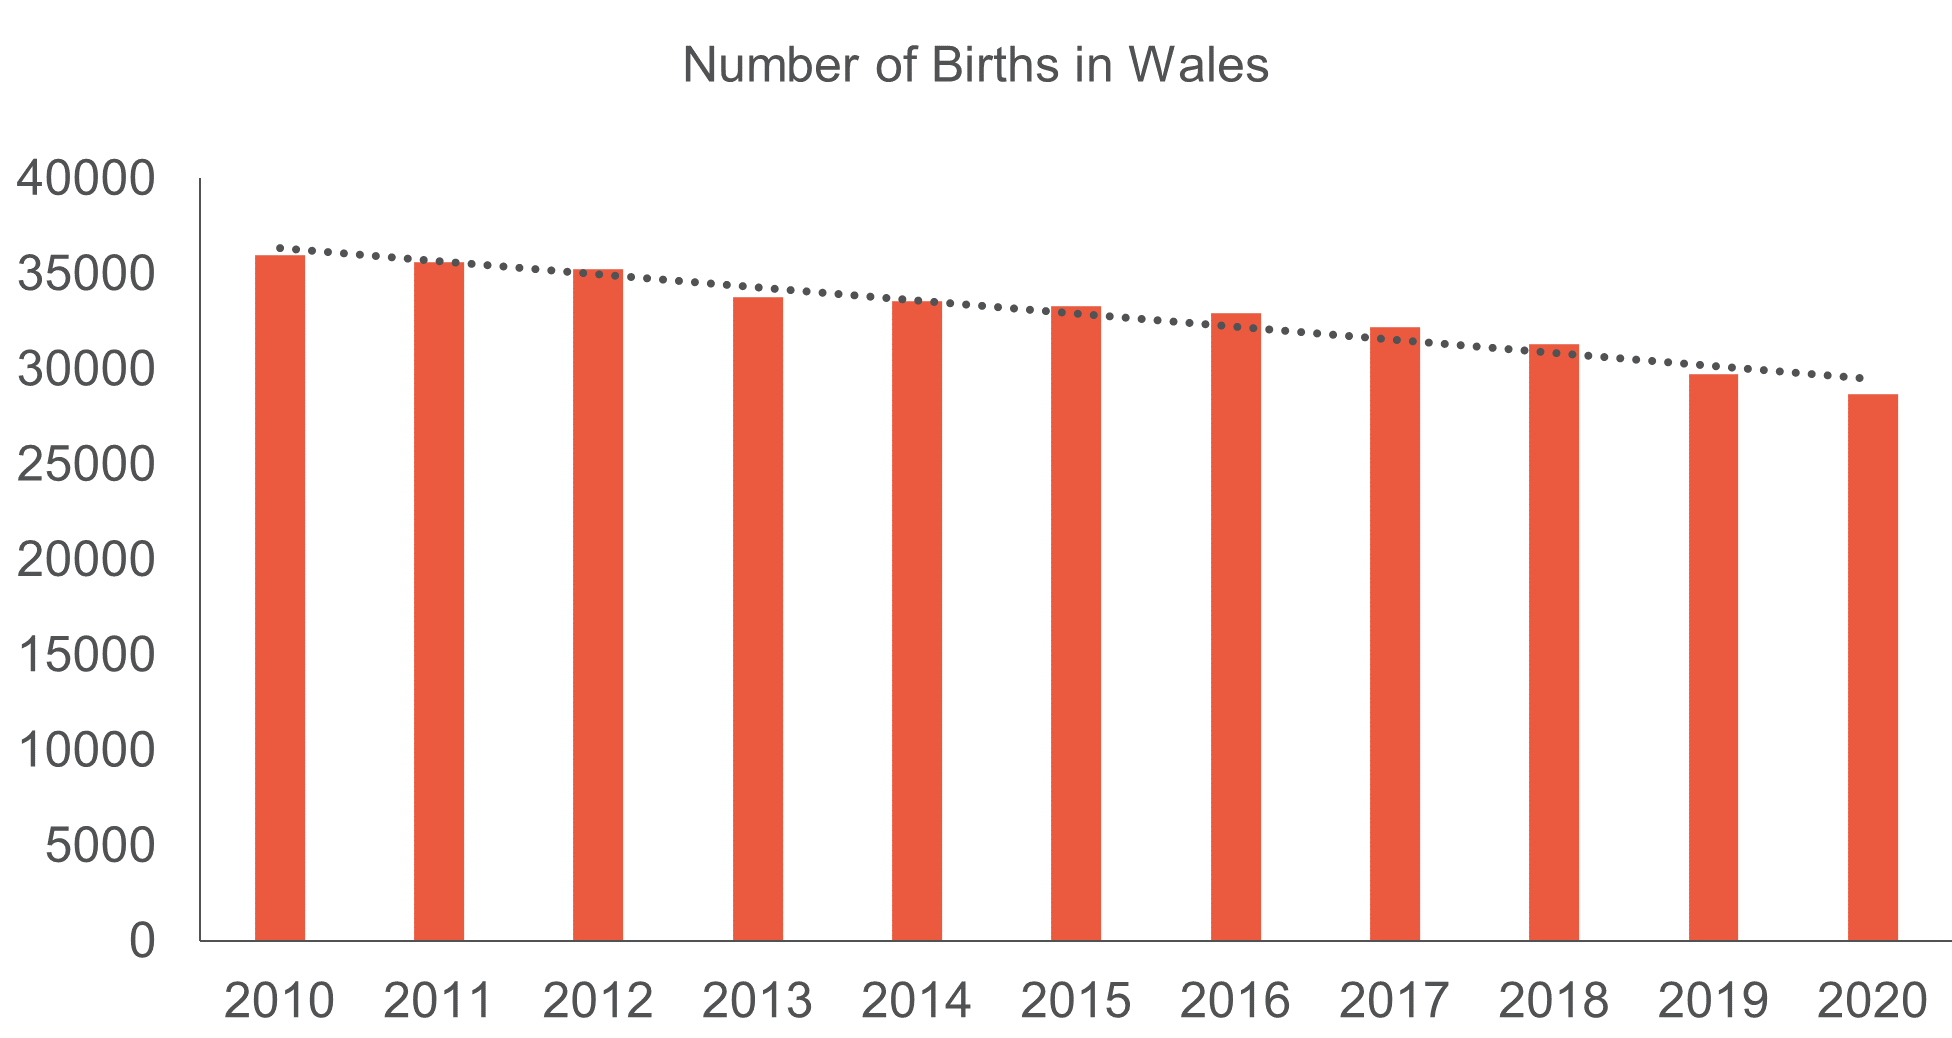 Bar chart showing the number of births in Wales declining over the past 10 years.